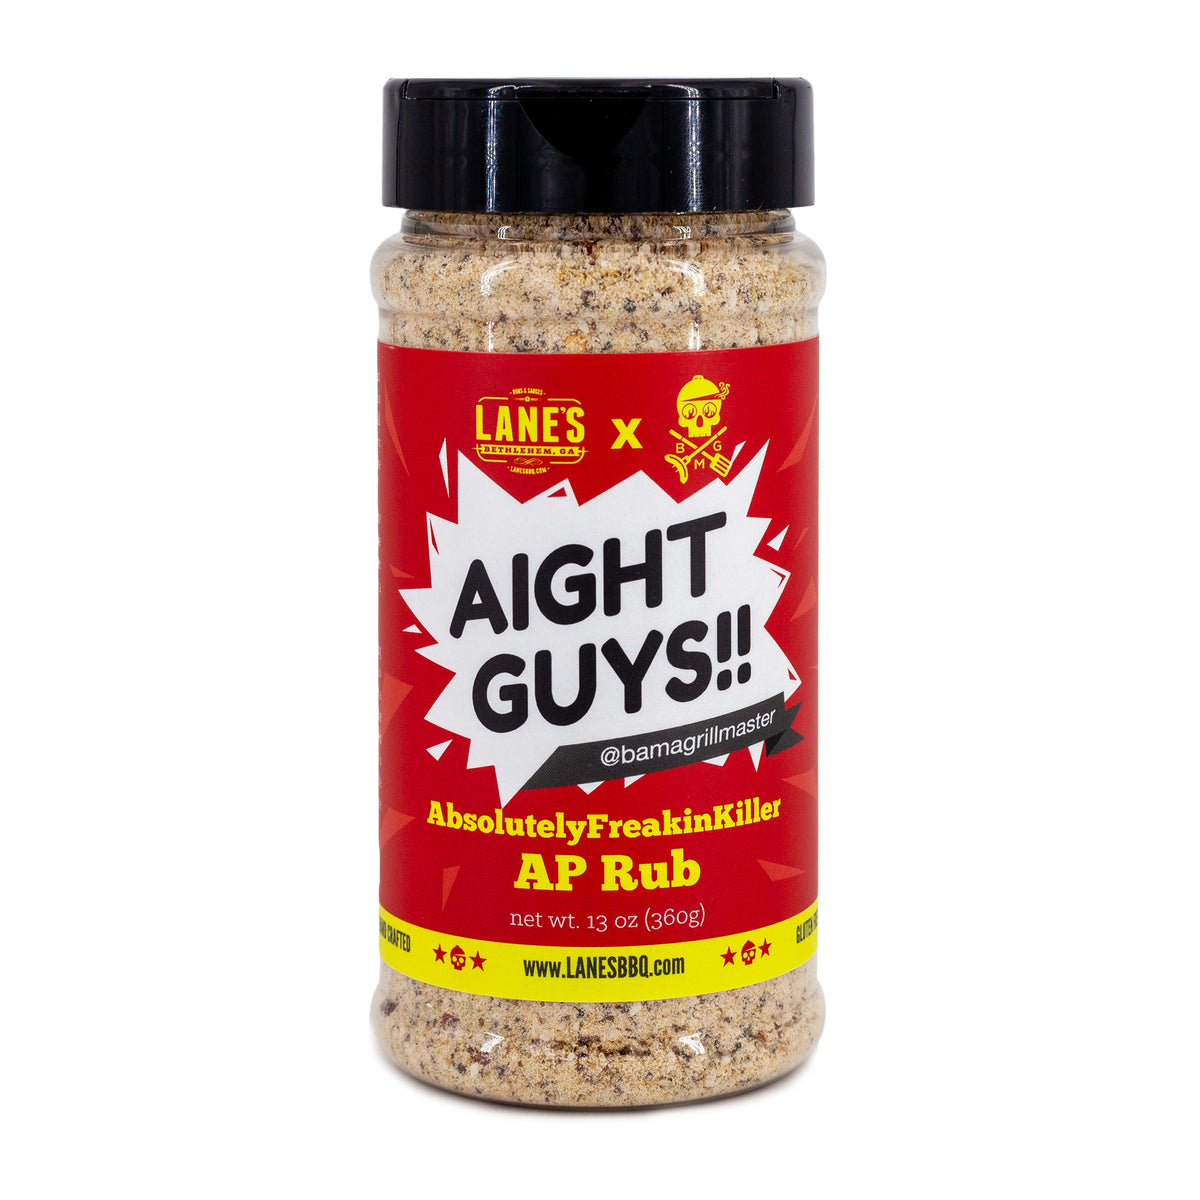 Old School A.P. Rub  Versatile All-Purpose Seasoning for Grilling and –  Rosendale Collective Shop